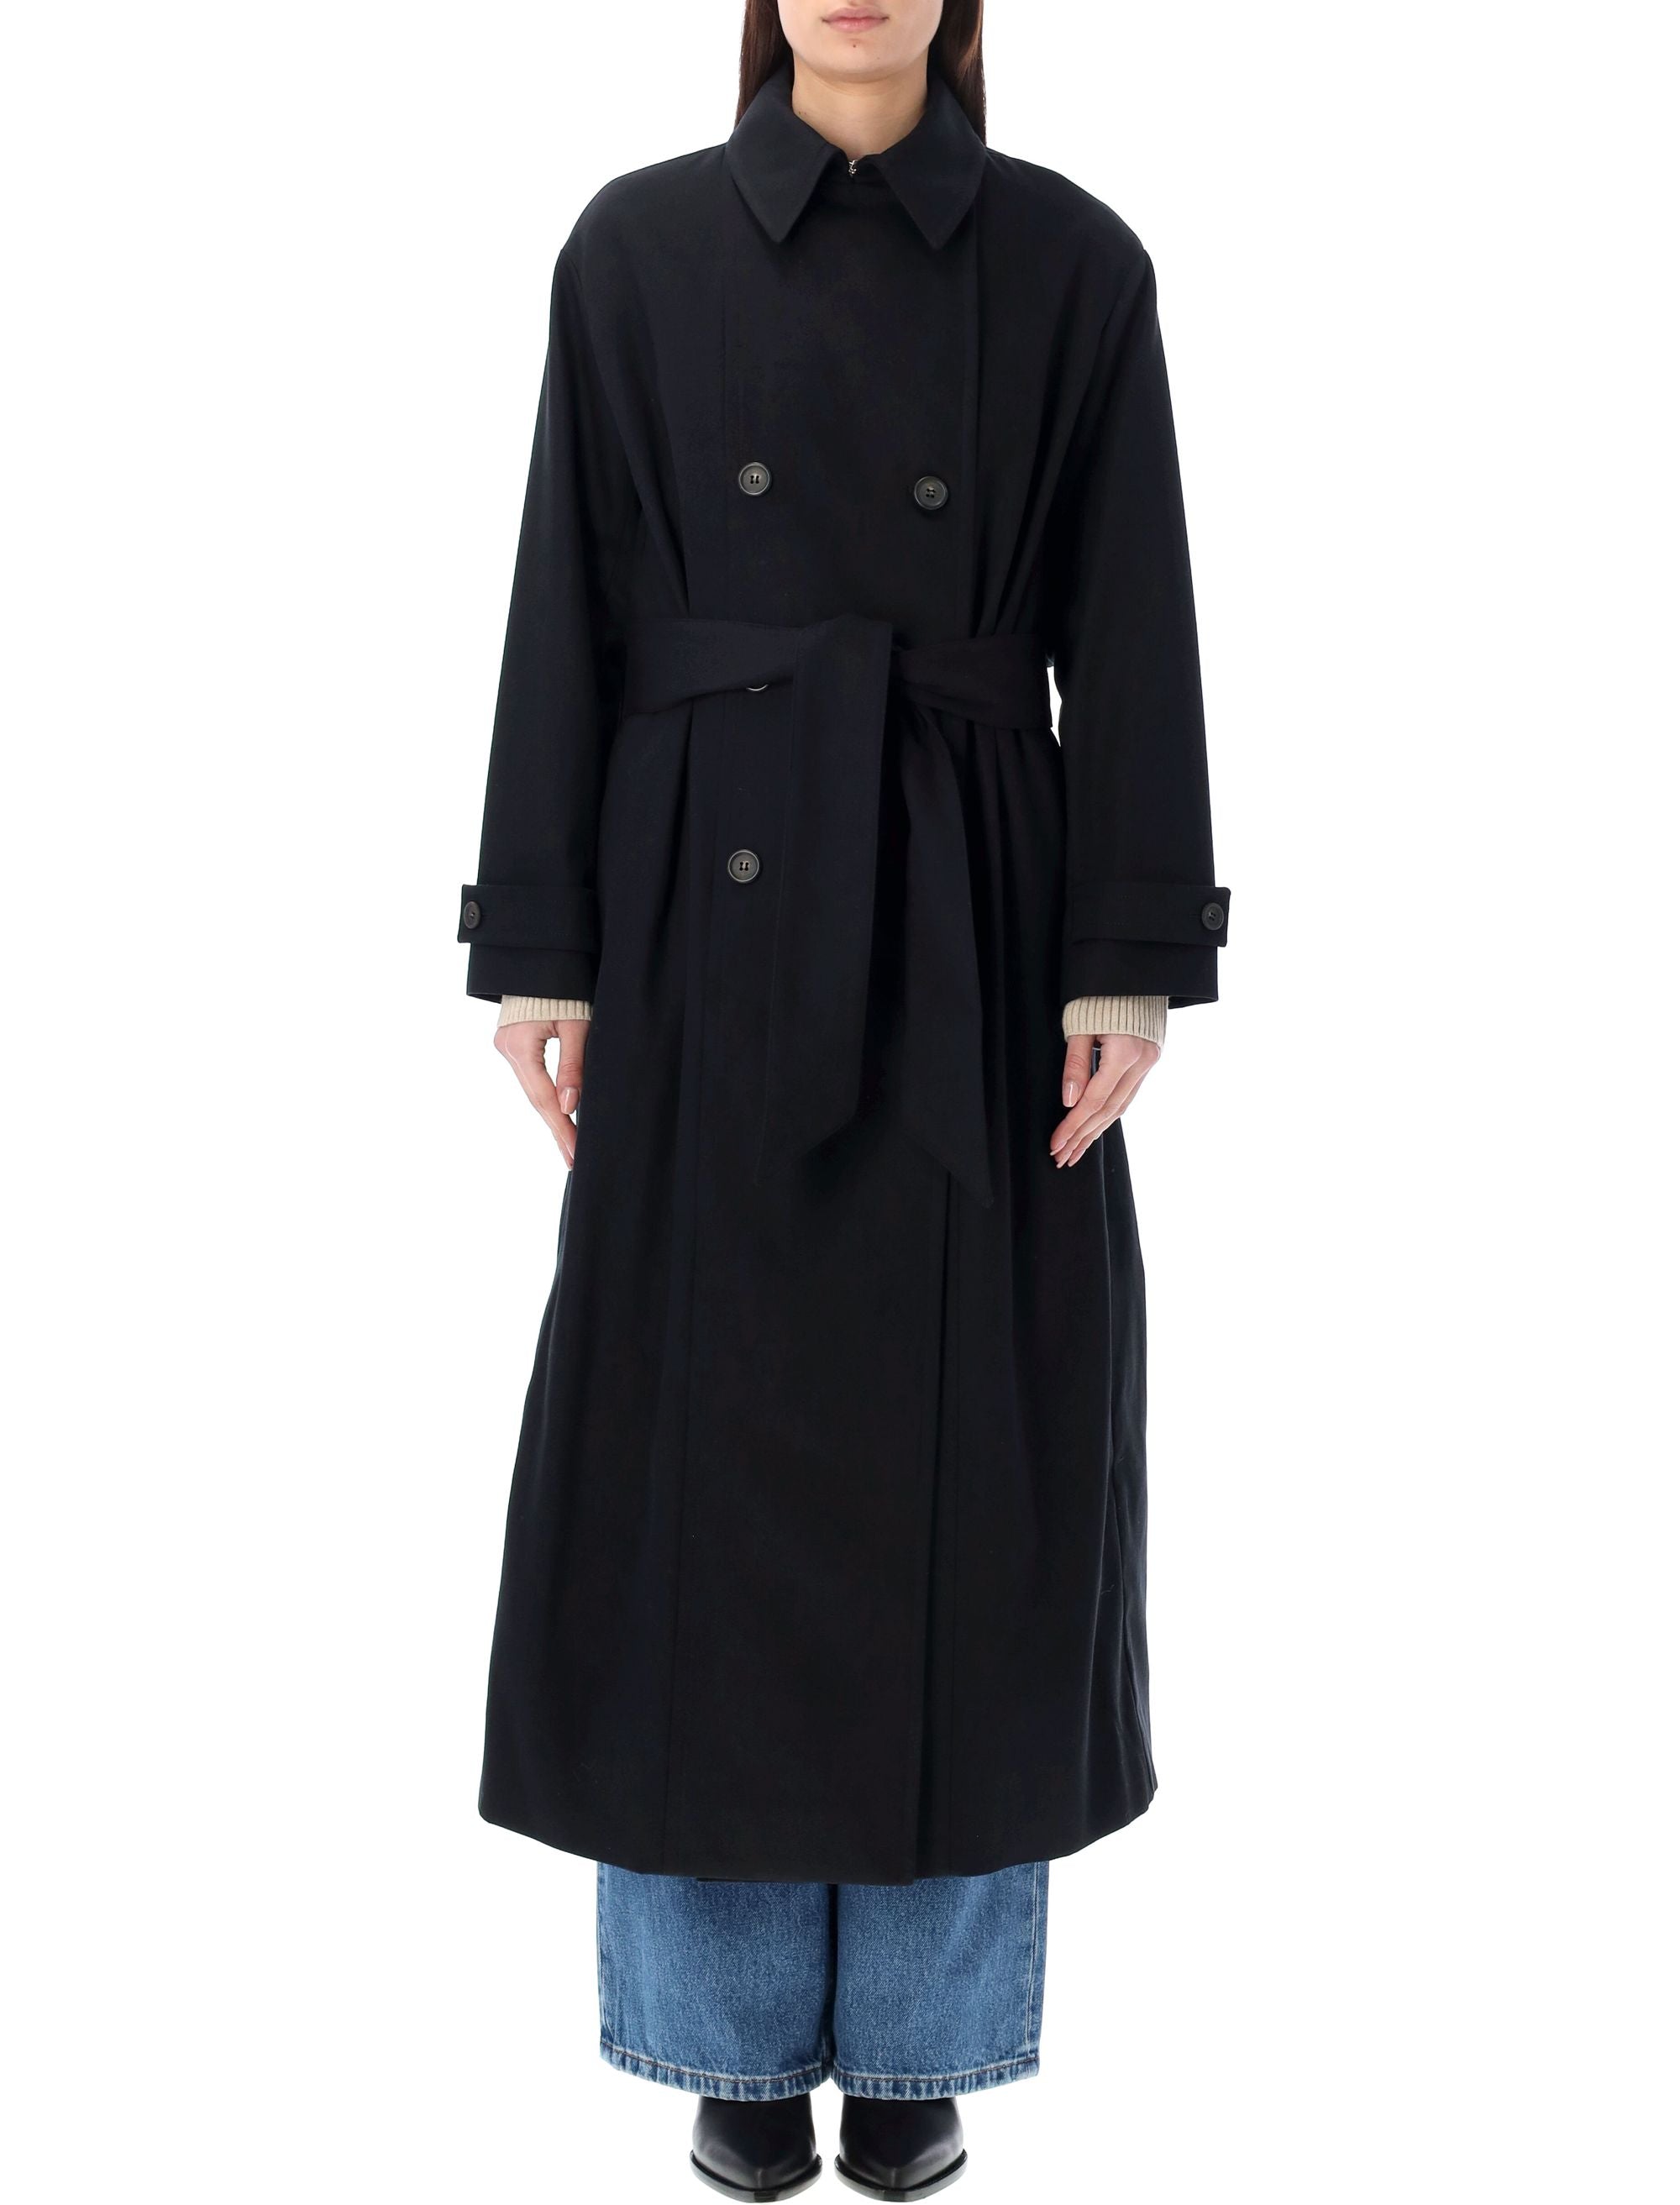 Apc Water-repellent Black Trench Jacket For Women